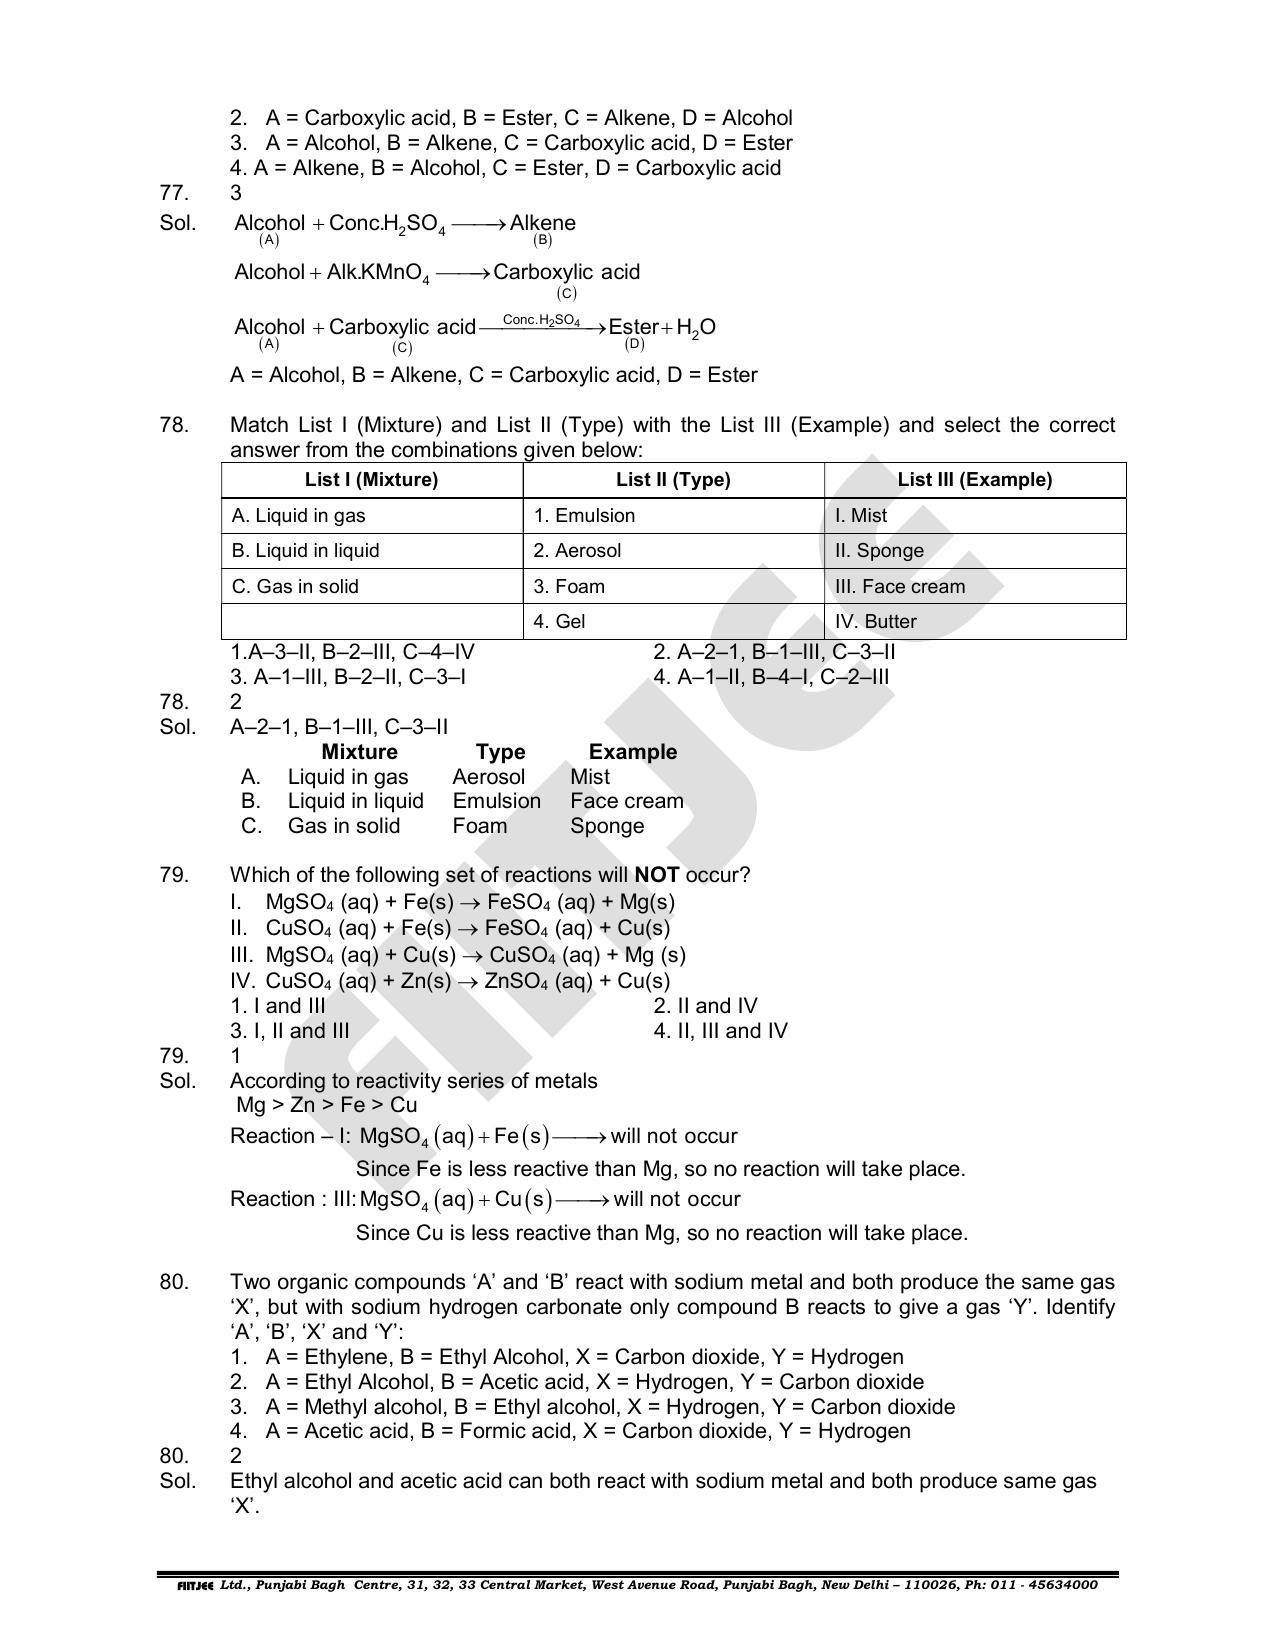 NTSE 2019 (Stage II) SAT Paper with Solution (June 16, 2019) - Page 25